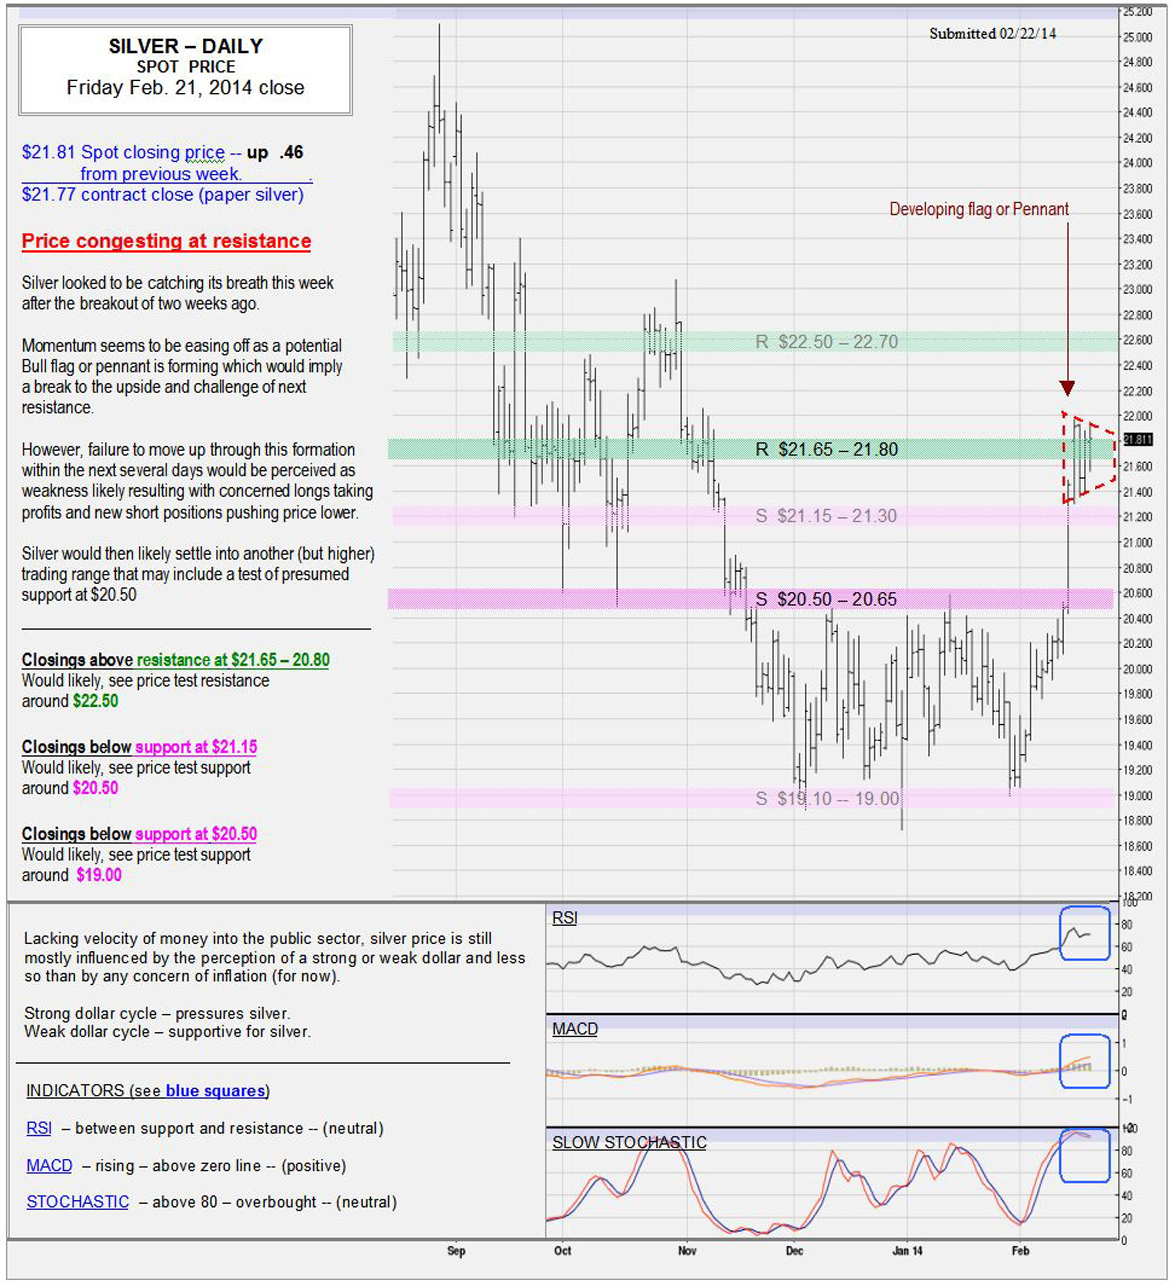 Feb 21, 2014 chart & commentary